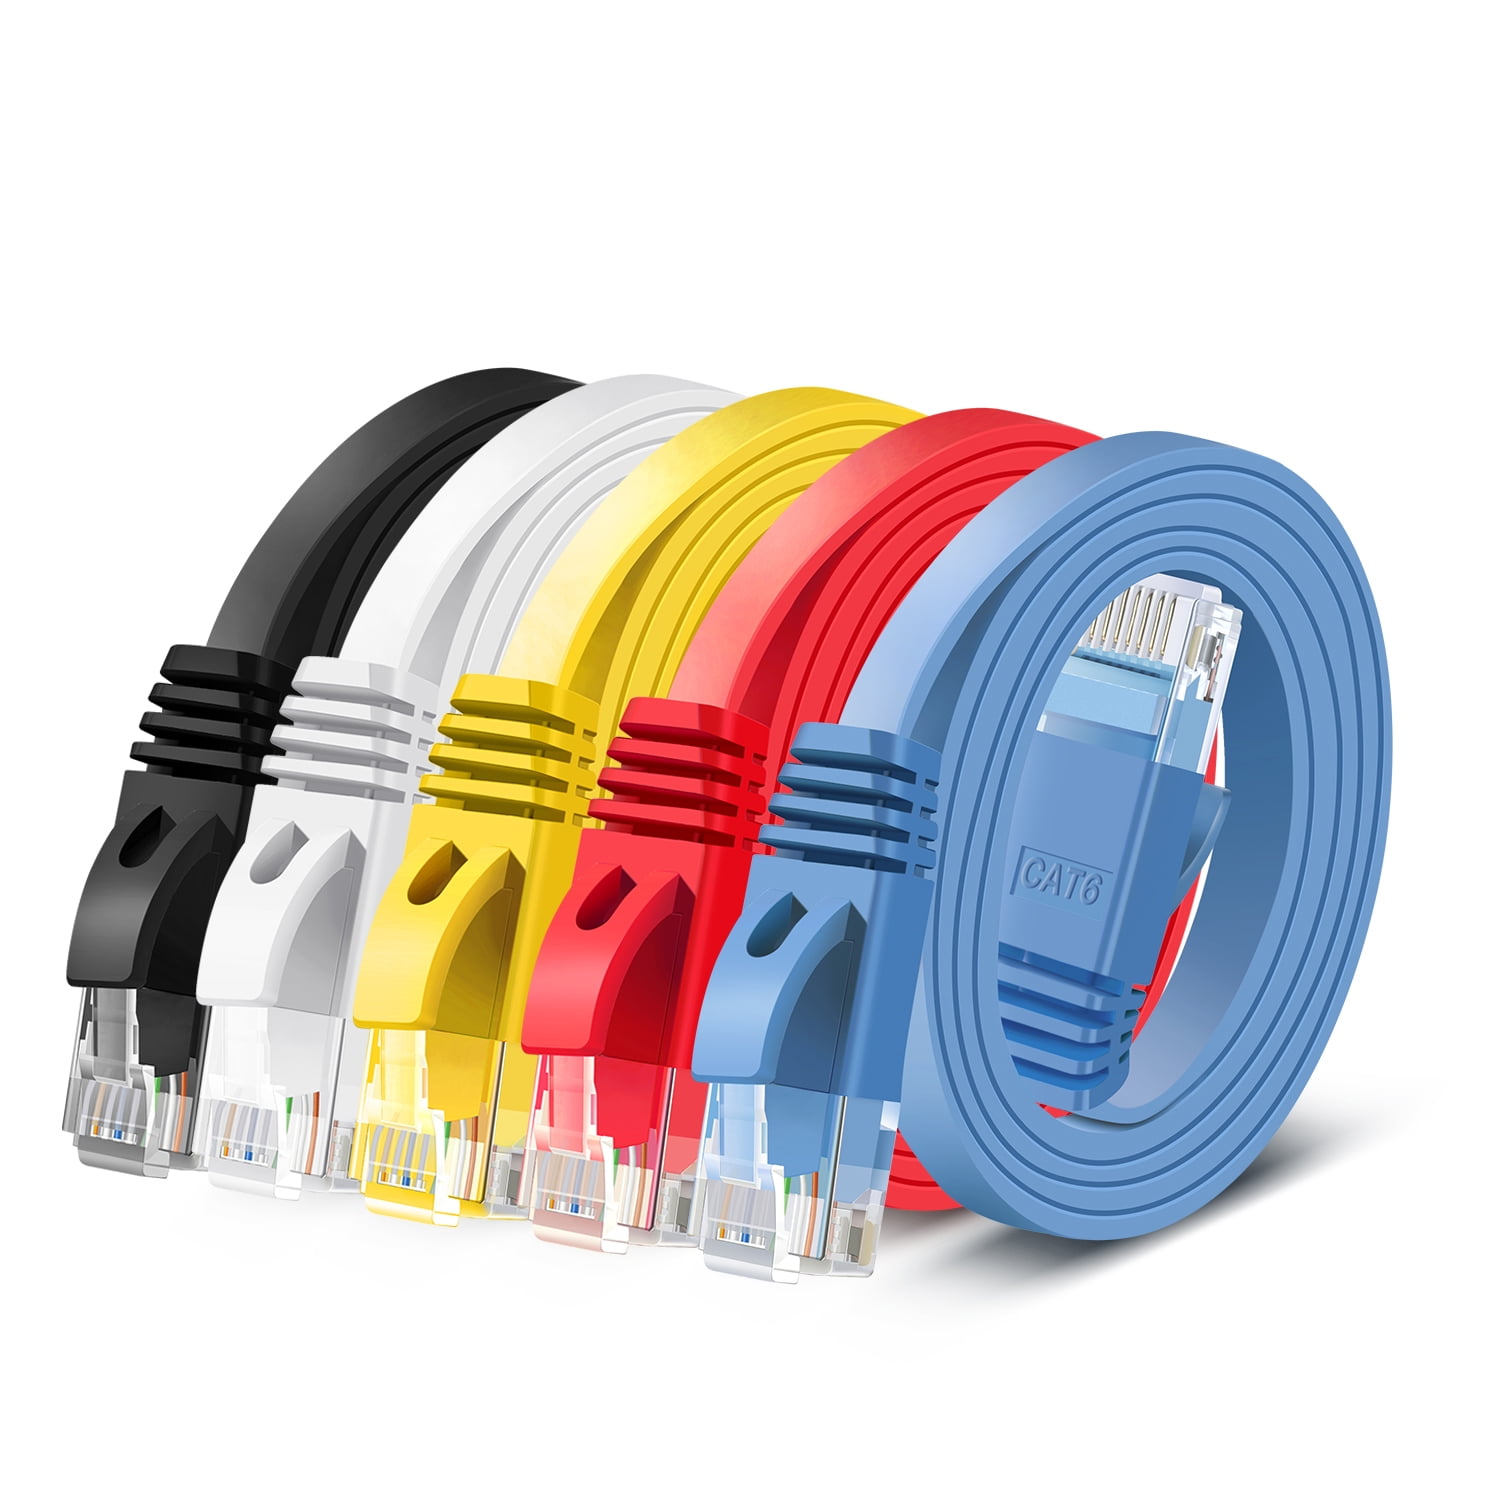 Cable Length: 15m, Color: Orange Computer Cables Computer Cable Ethernet CAT6 Internet Network Flat Cable Cord Patch Lead RJ45 for PC Router 